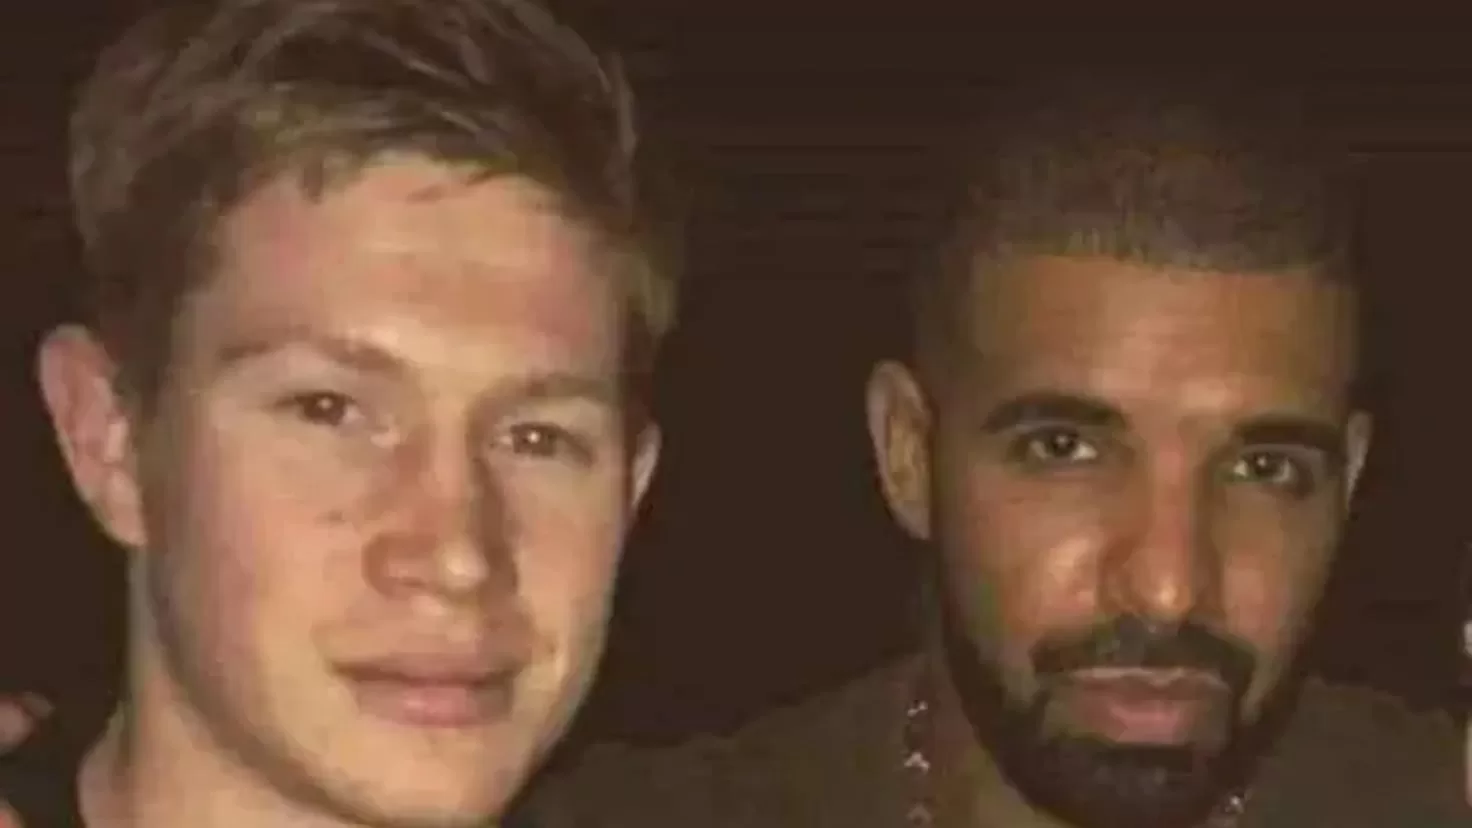 The misunderstanding that ended with Kevin De Bruyne as co-writer of a Drake song
